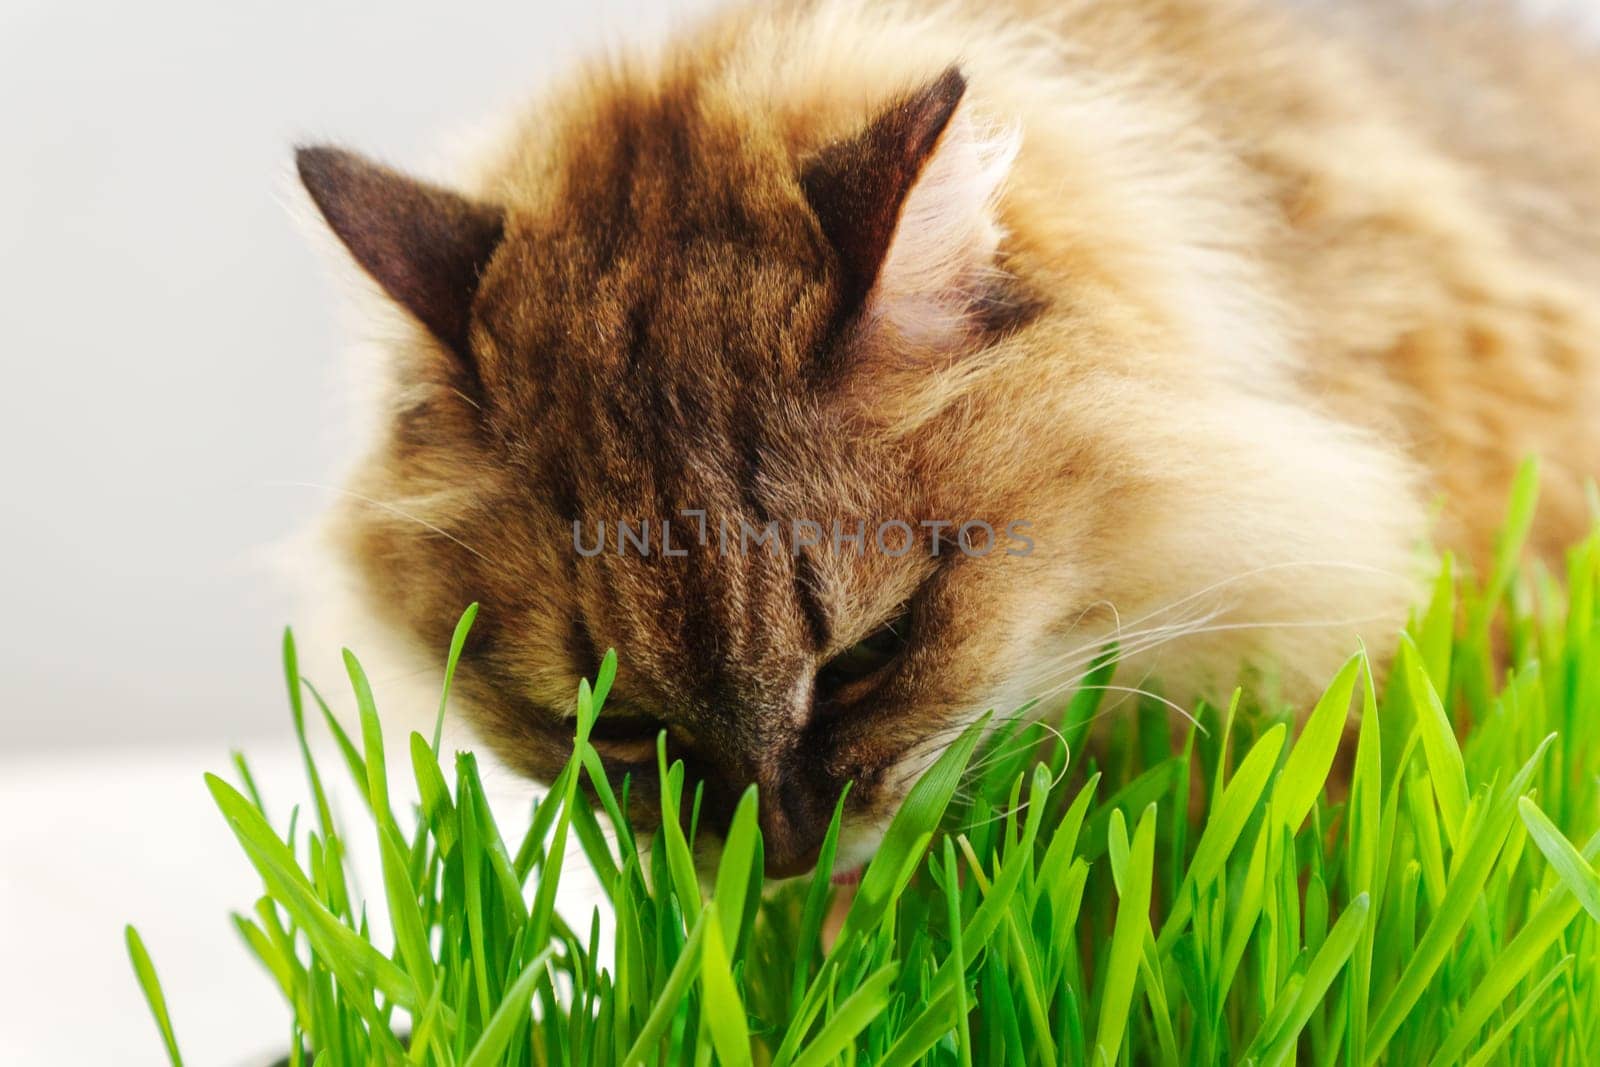 Cat is peacefully nibbling on a patch of vibrant green grass, possibly as a way to aid its digestion. by darksoul72